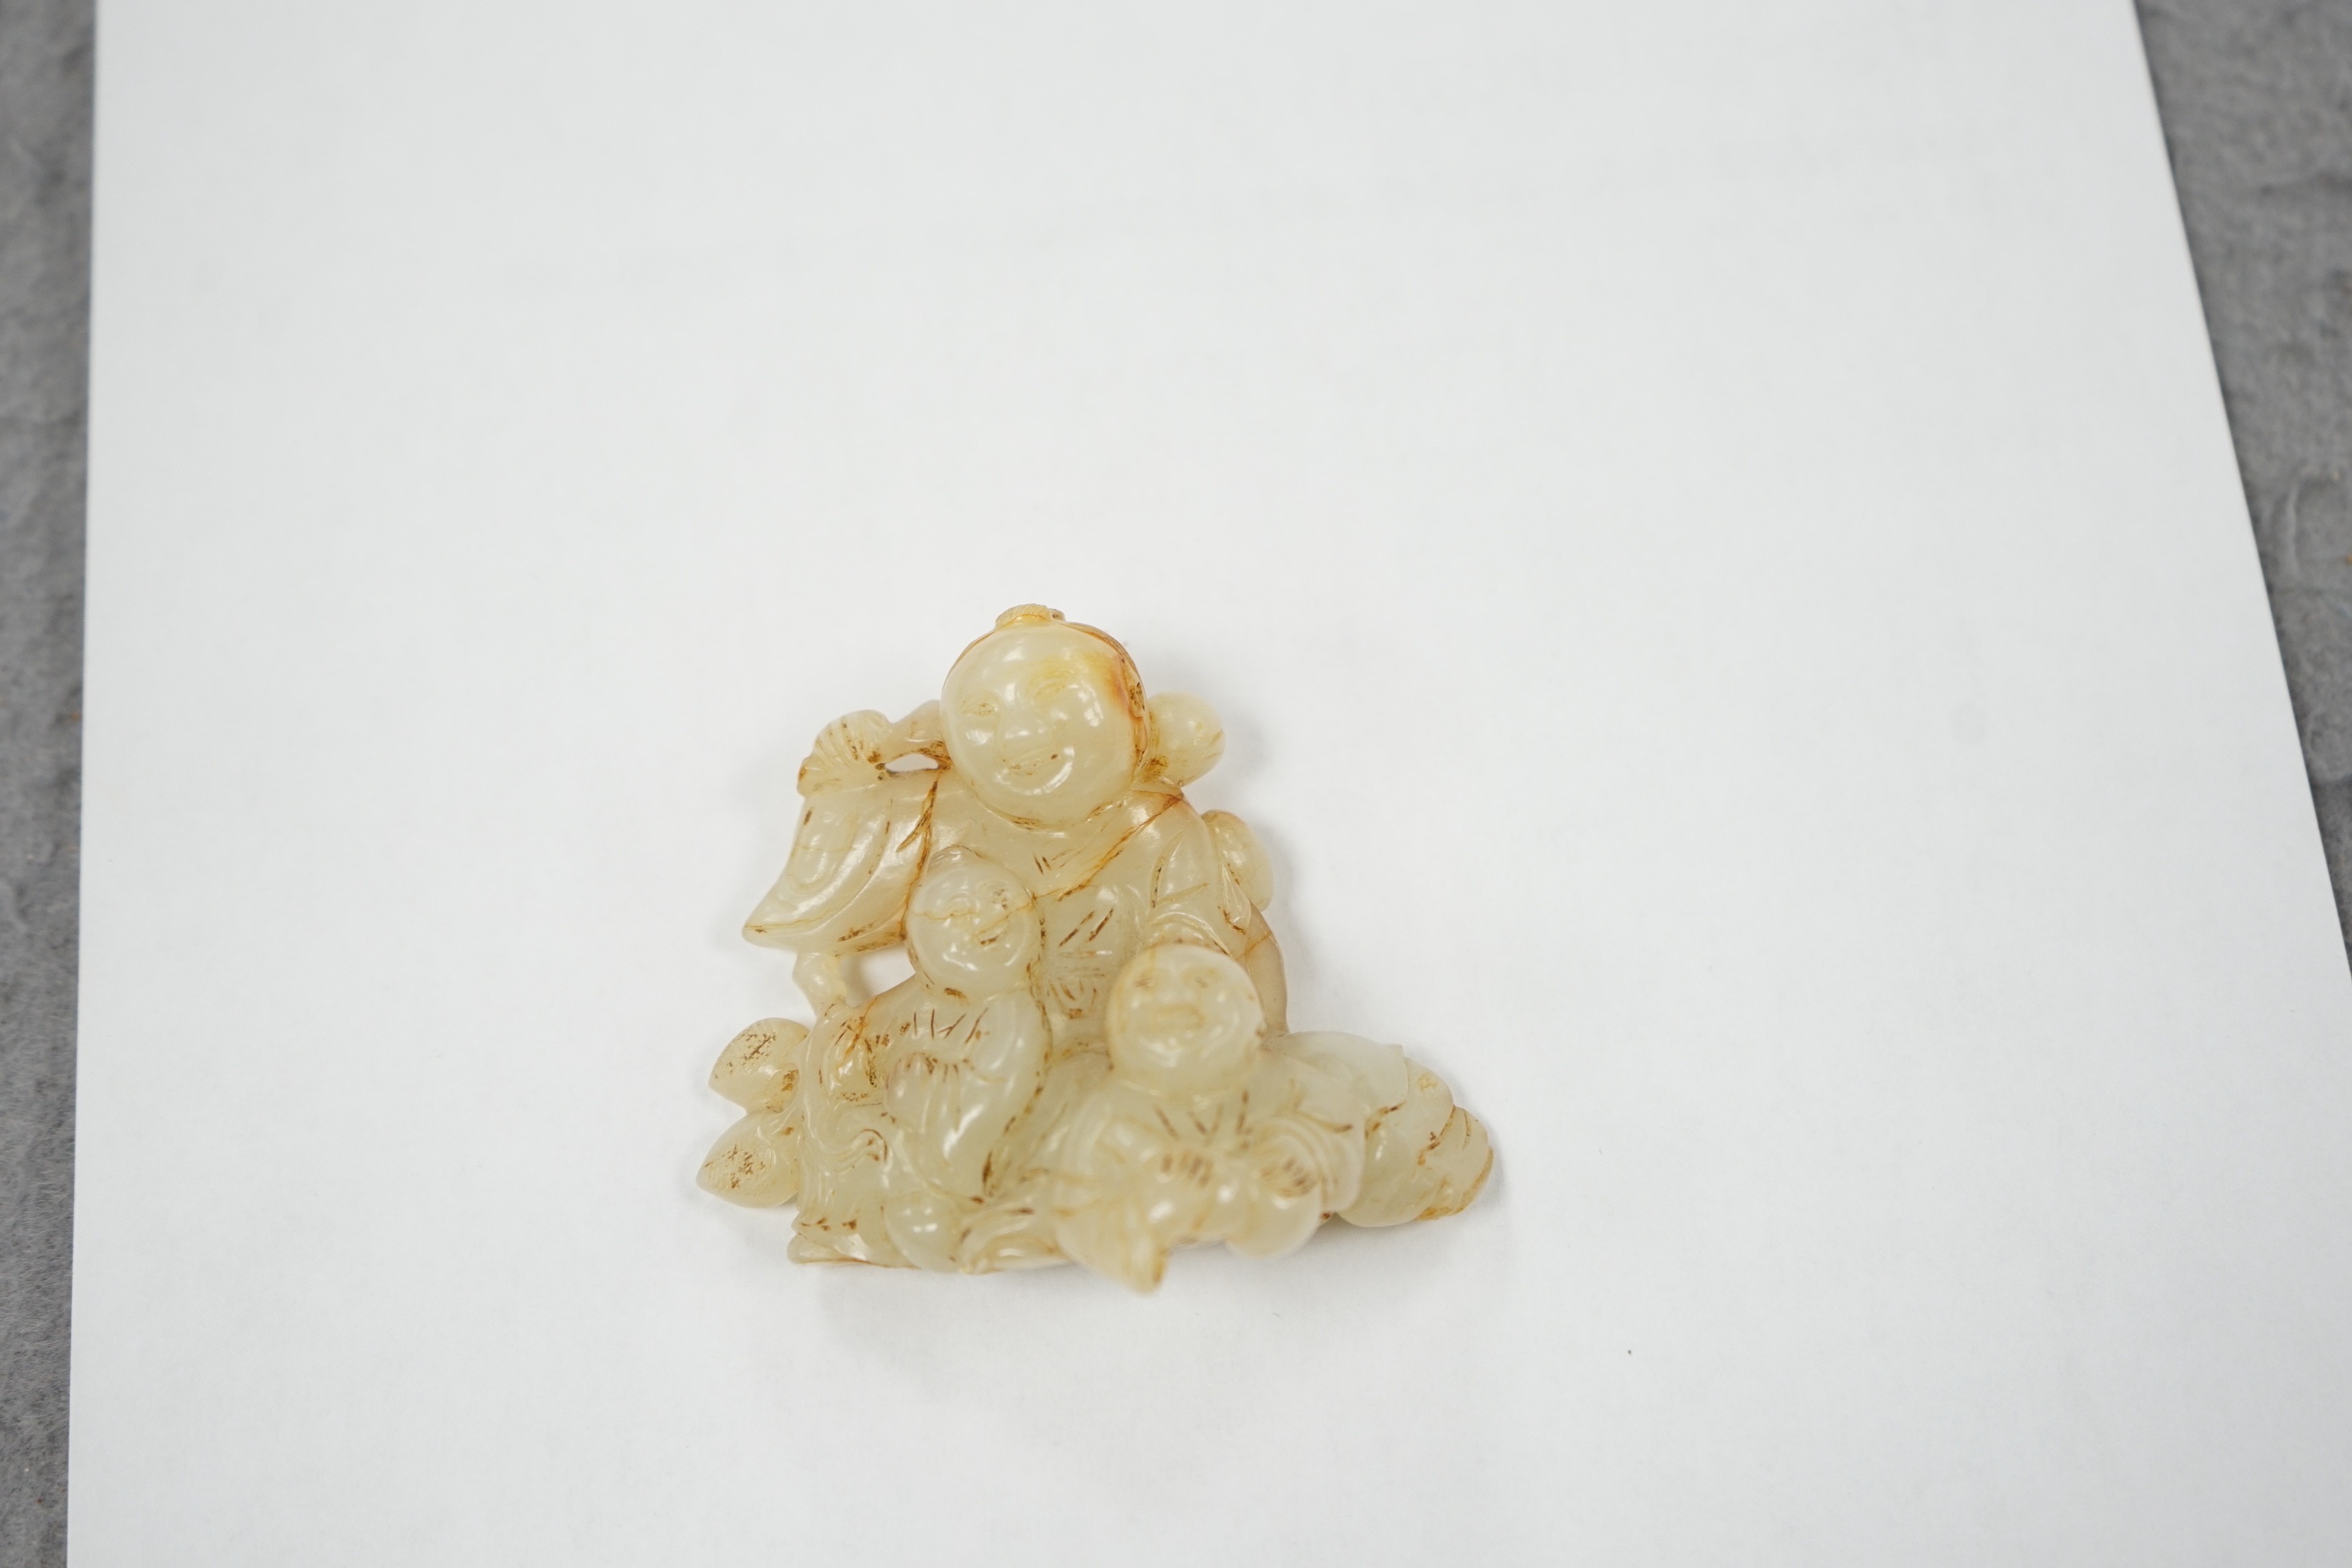 A Chinese white and russet jade group of three boys, 18th/19th century, 7.2 cm, wood stand